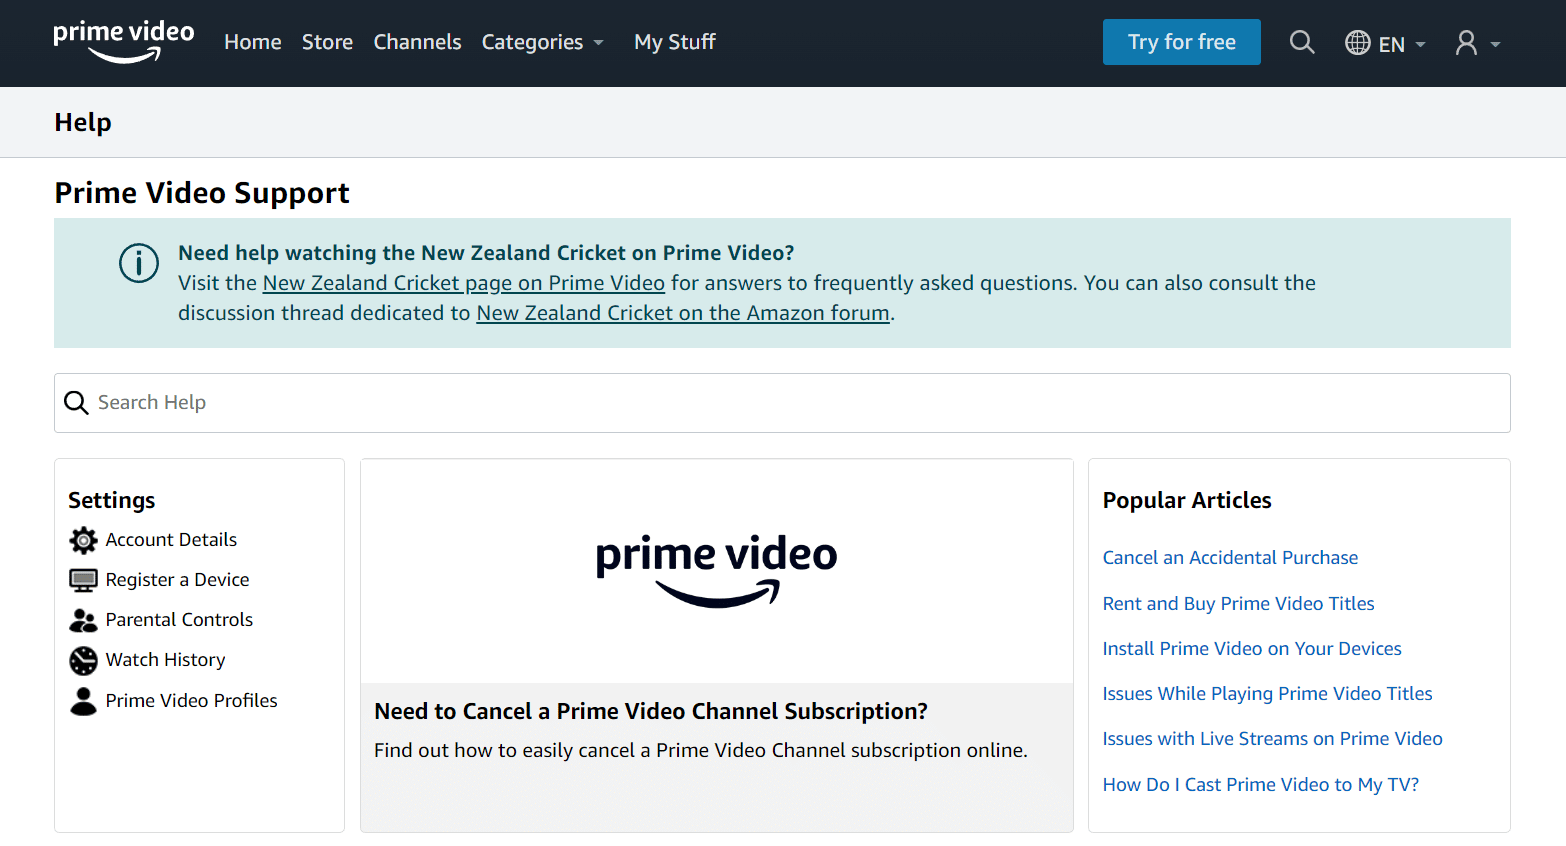 Contact Prime Video Support 